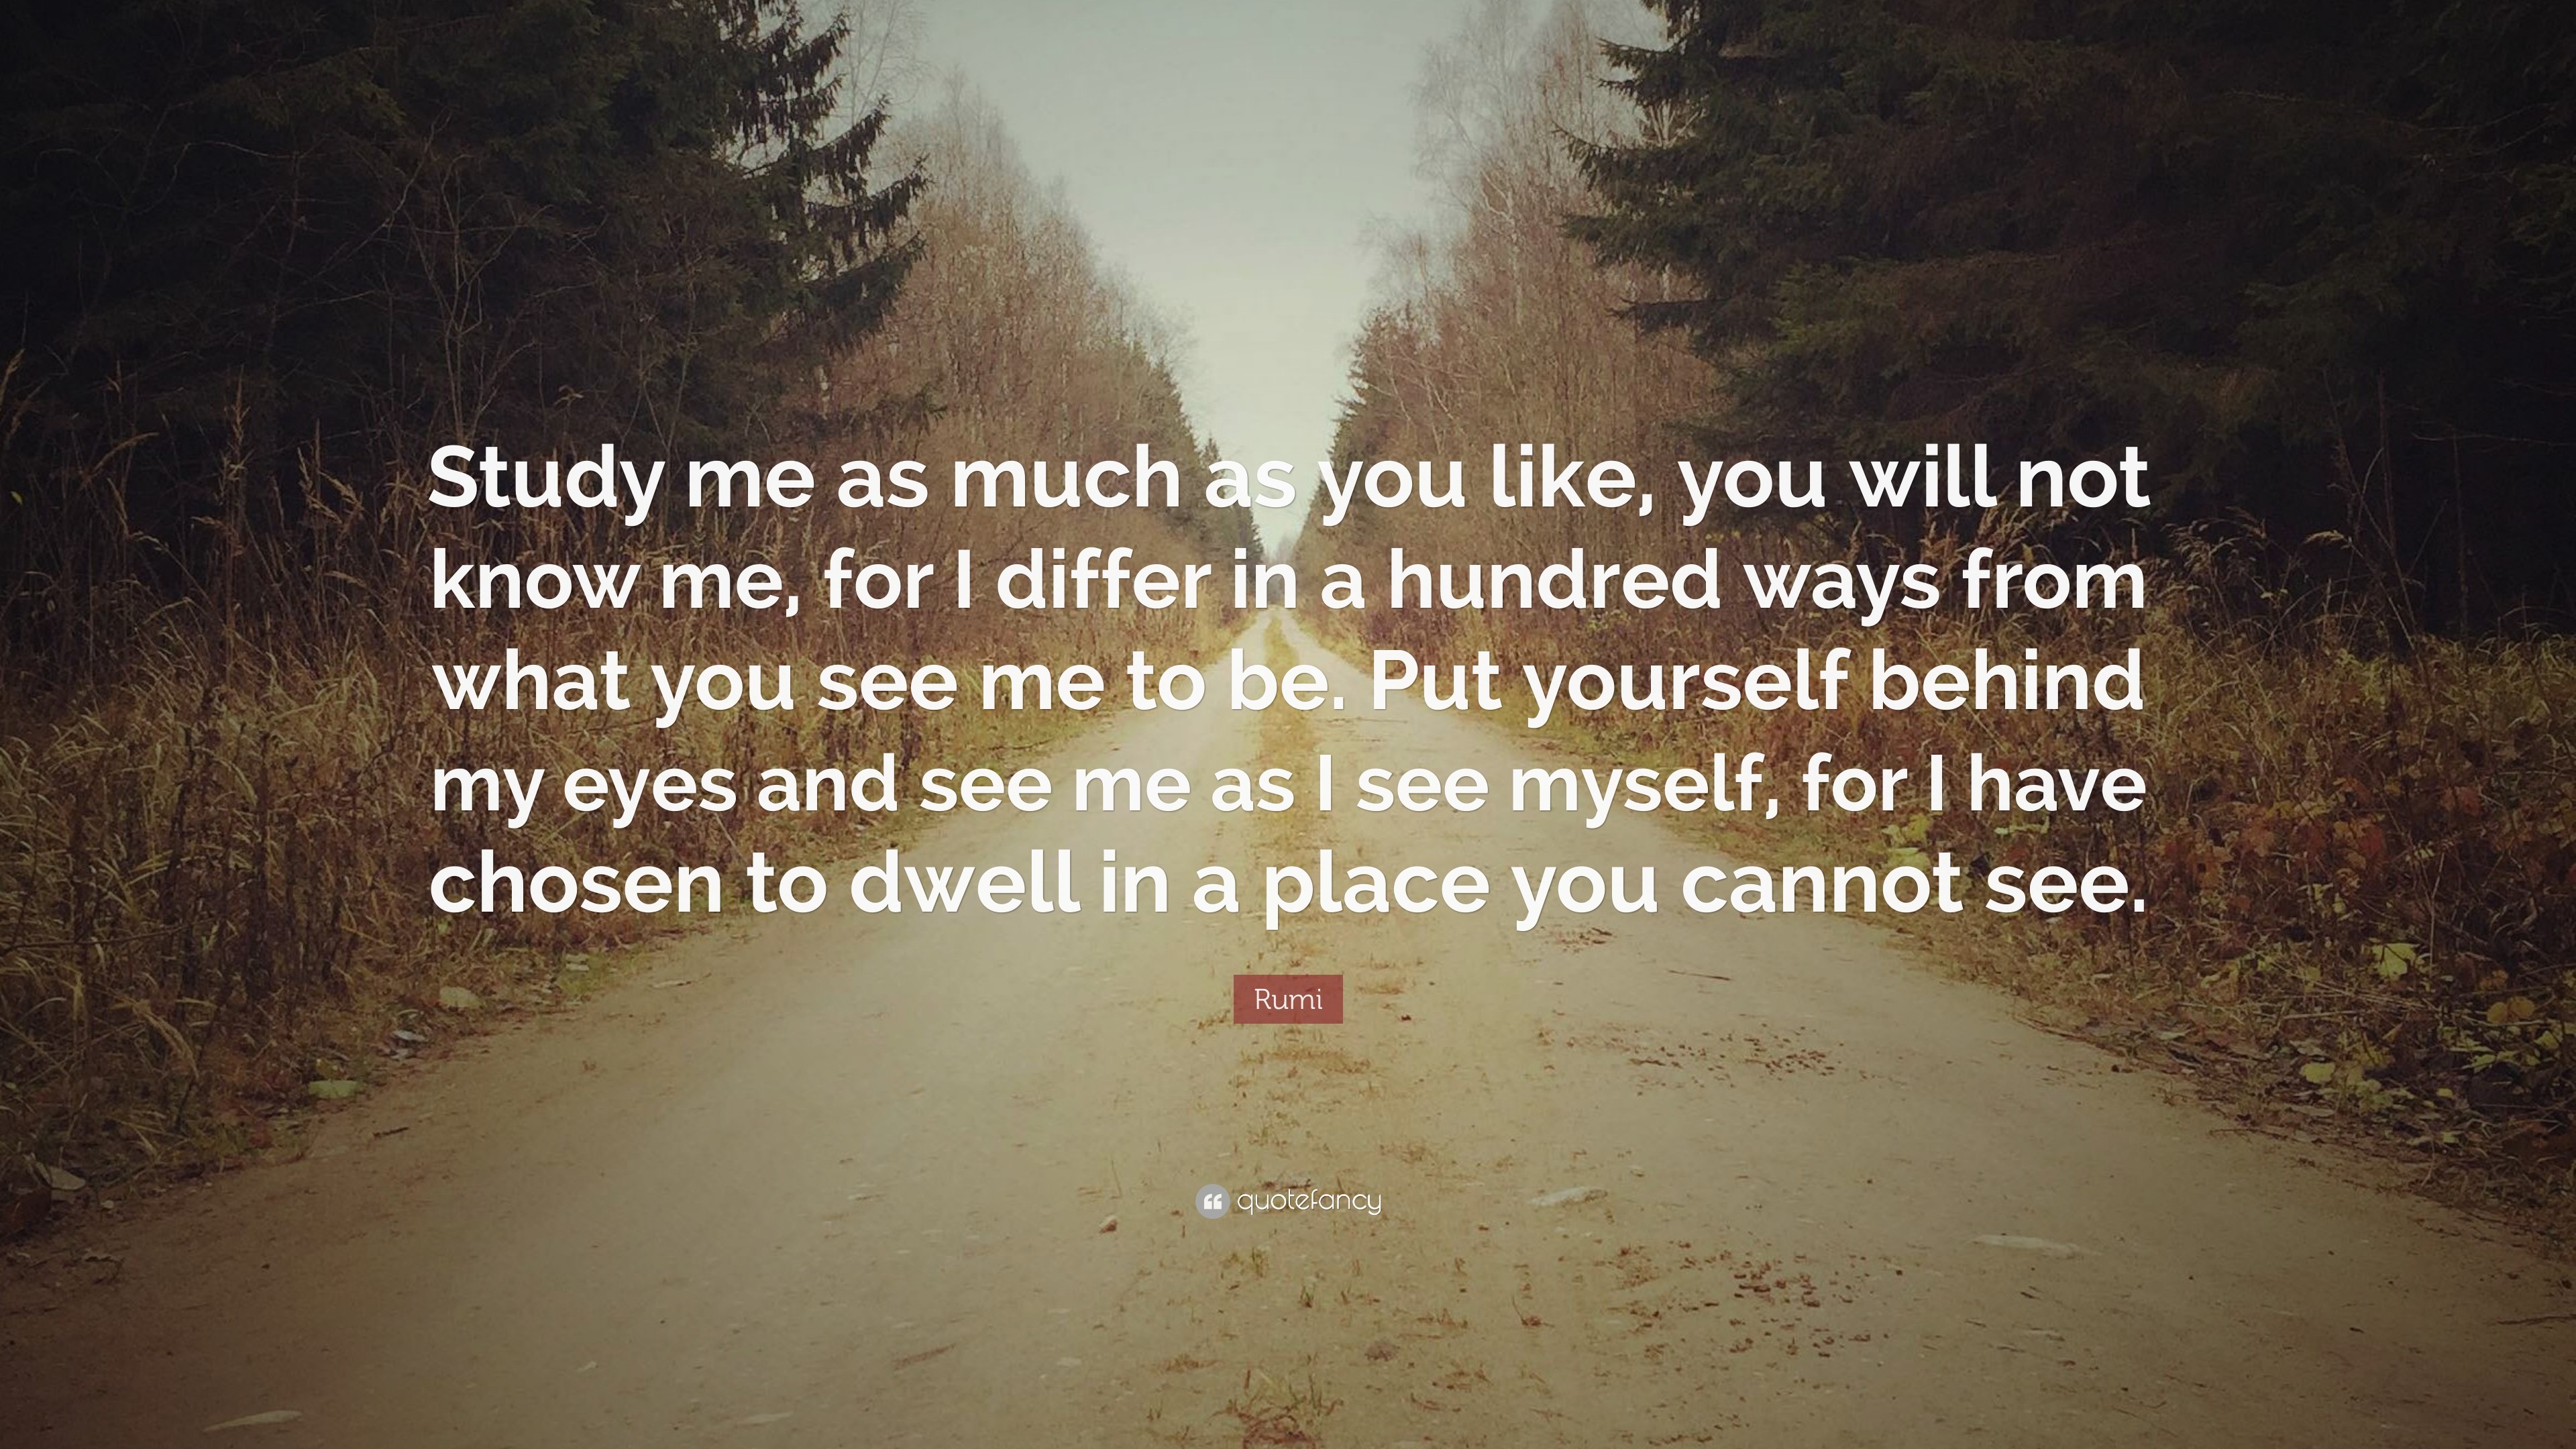 3840x2160 Spiritual Quotes: “Study me as much as you like, you will not know